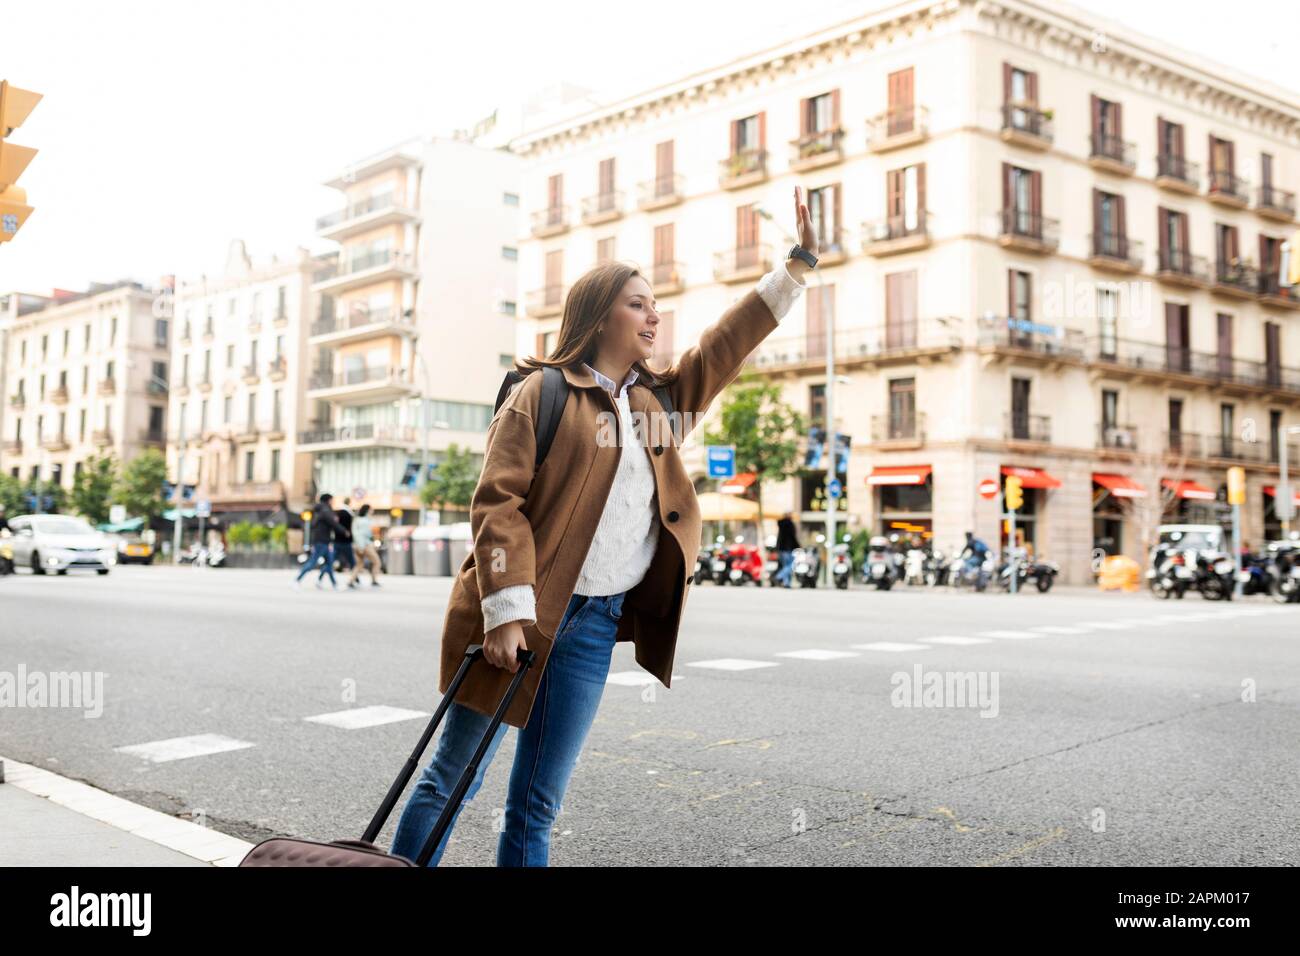 Young woman in the city hailing a taxi, Barcelona, Spain Stock Photo